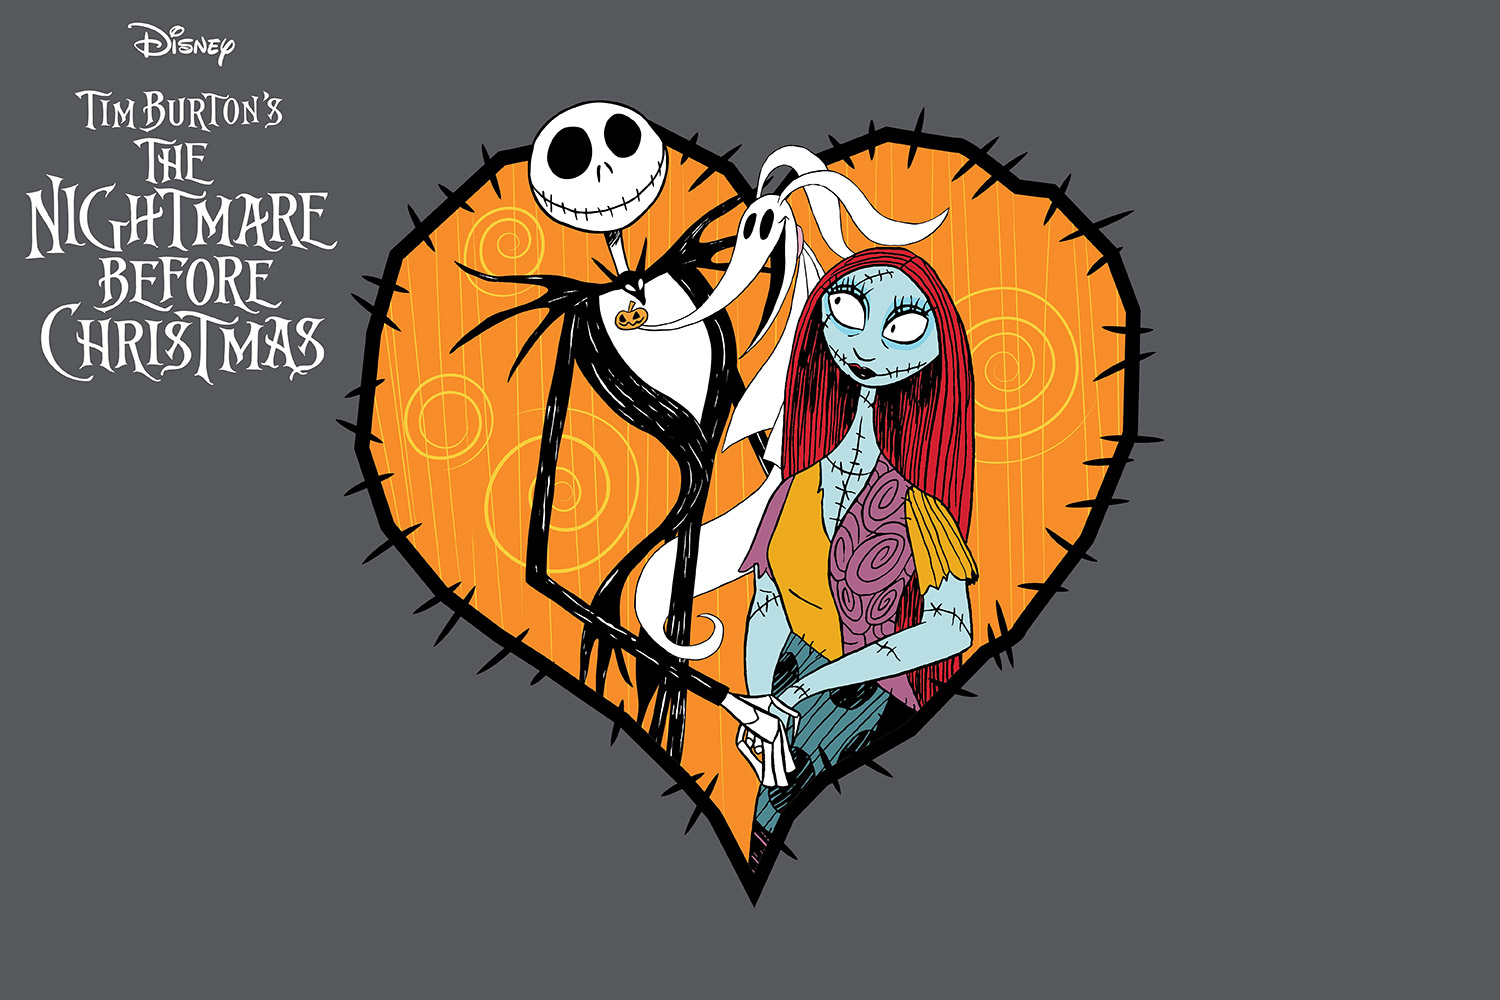 The Nightmare Before Christmas wallpapers.